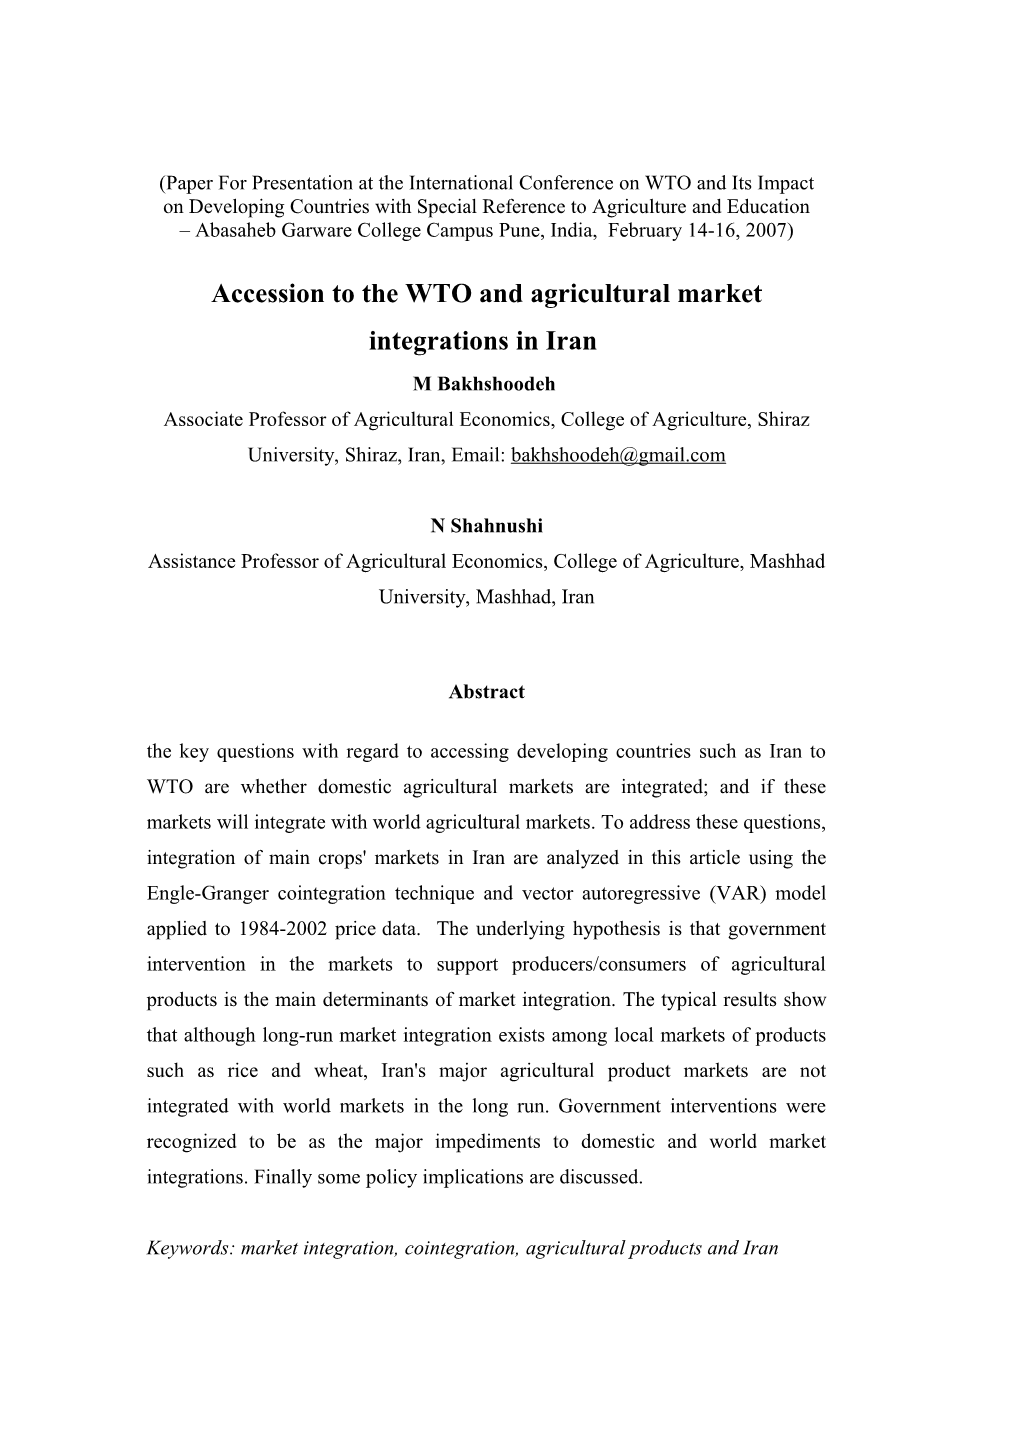 Cointegration and Market Integration: an Application to the Iranian Wheat and Rice Martkets